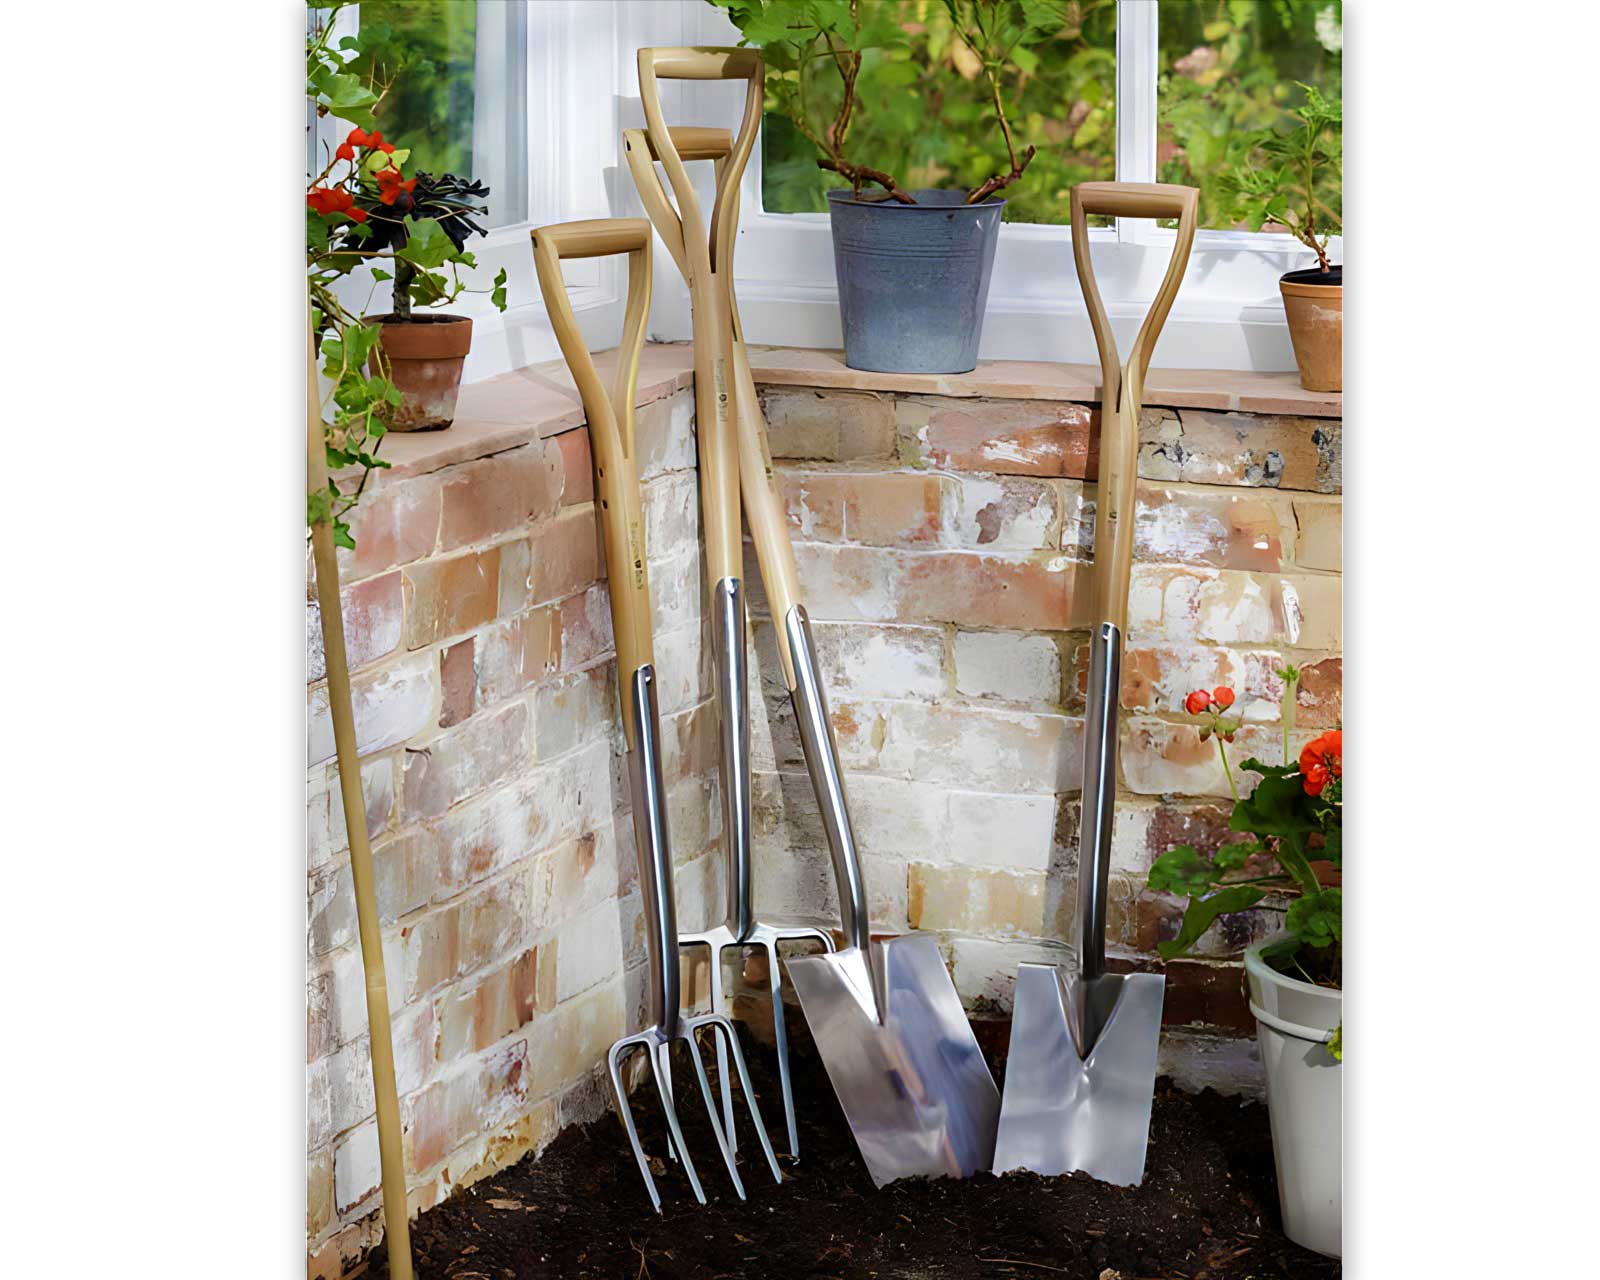 Digging Fork and Spade are longer and broader than the Border pair which are shorter and narrower